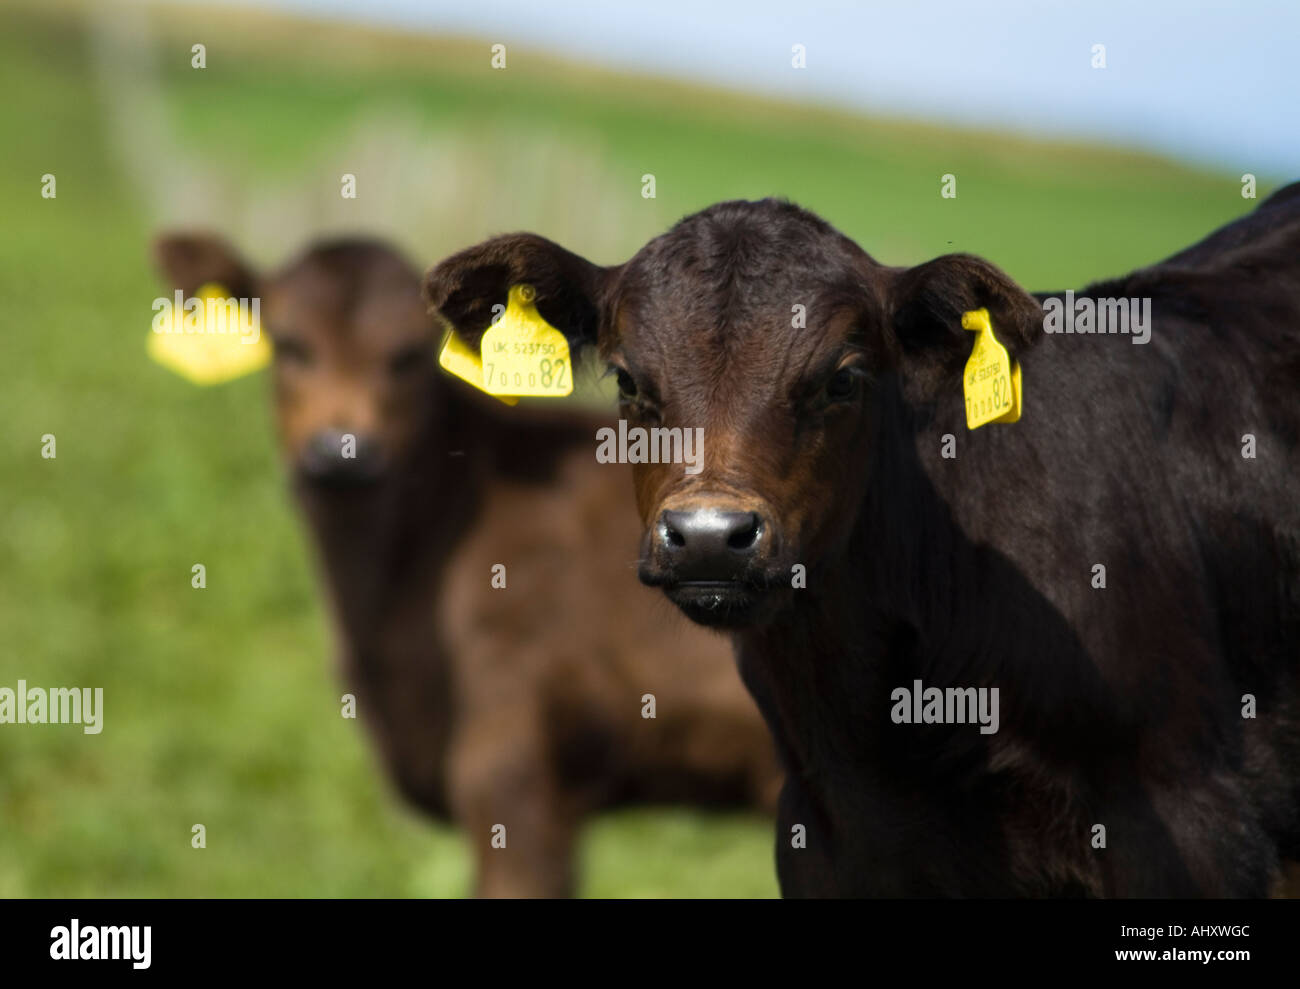 dh Calf COW UK Brown faced calves crossbreed cow face cows agronomy tags record control id animal identification tag Stock Photo